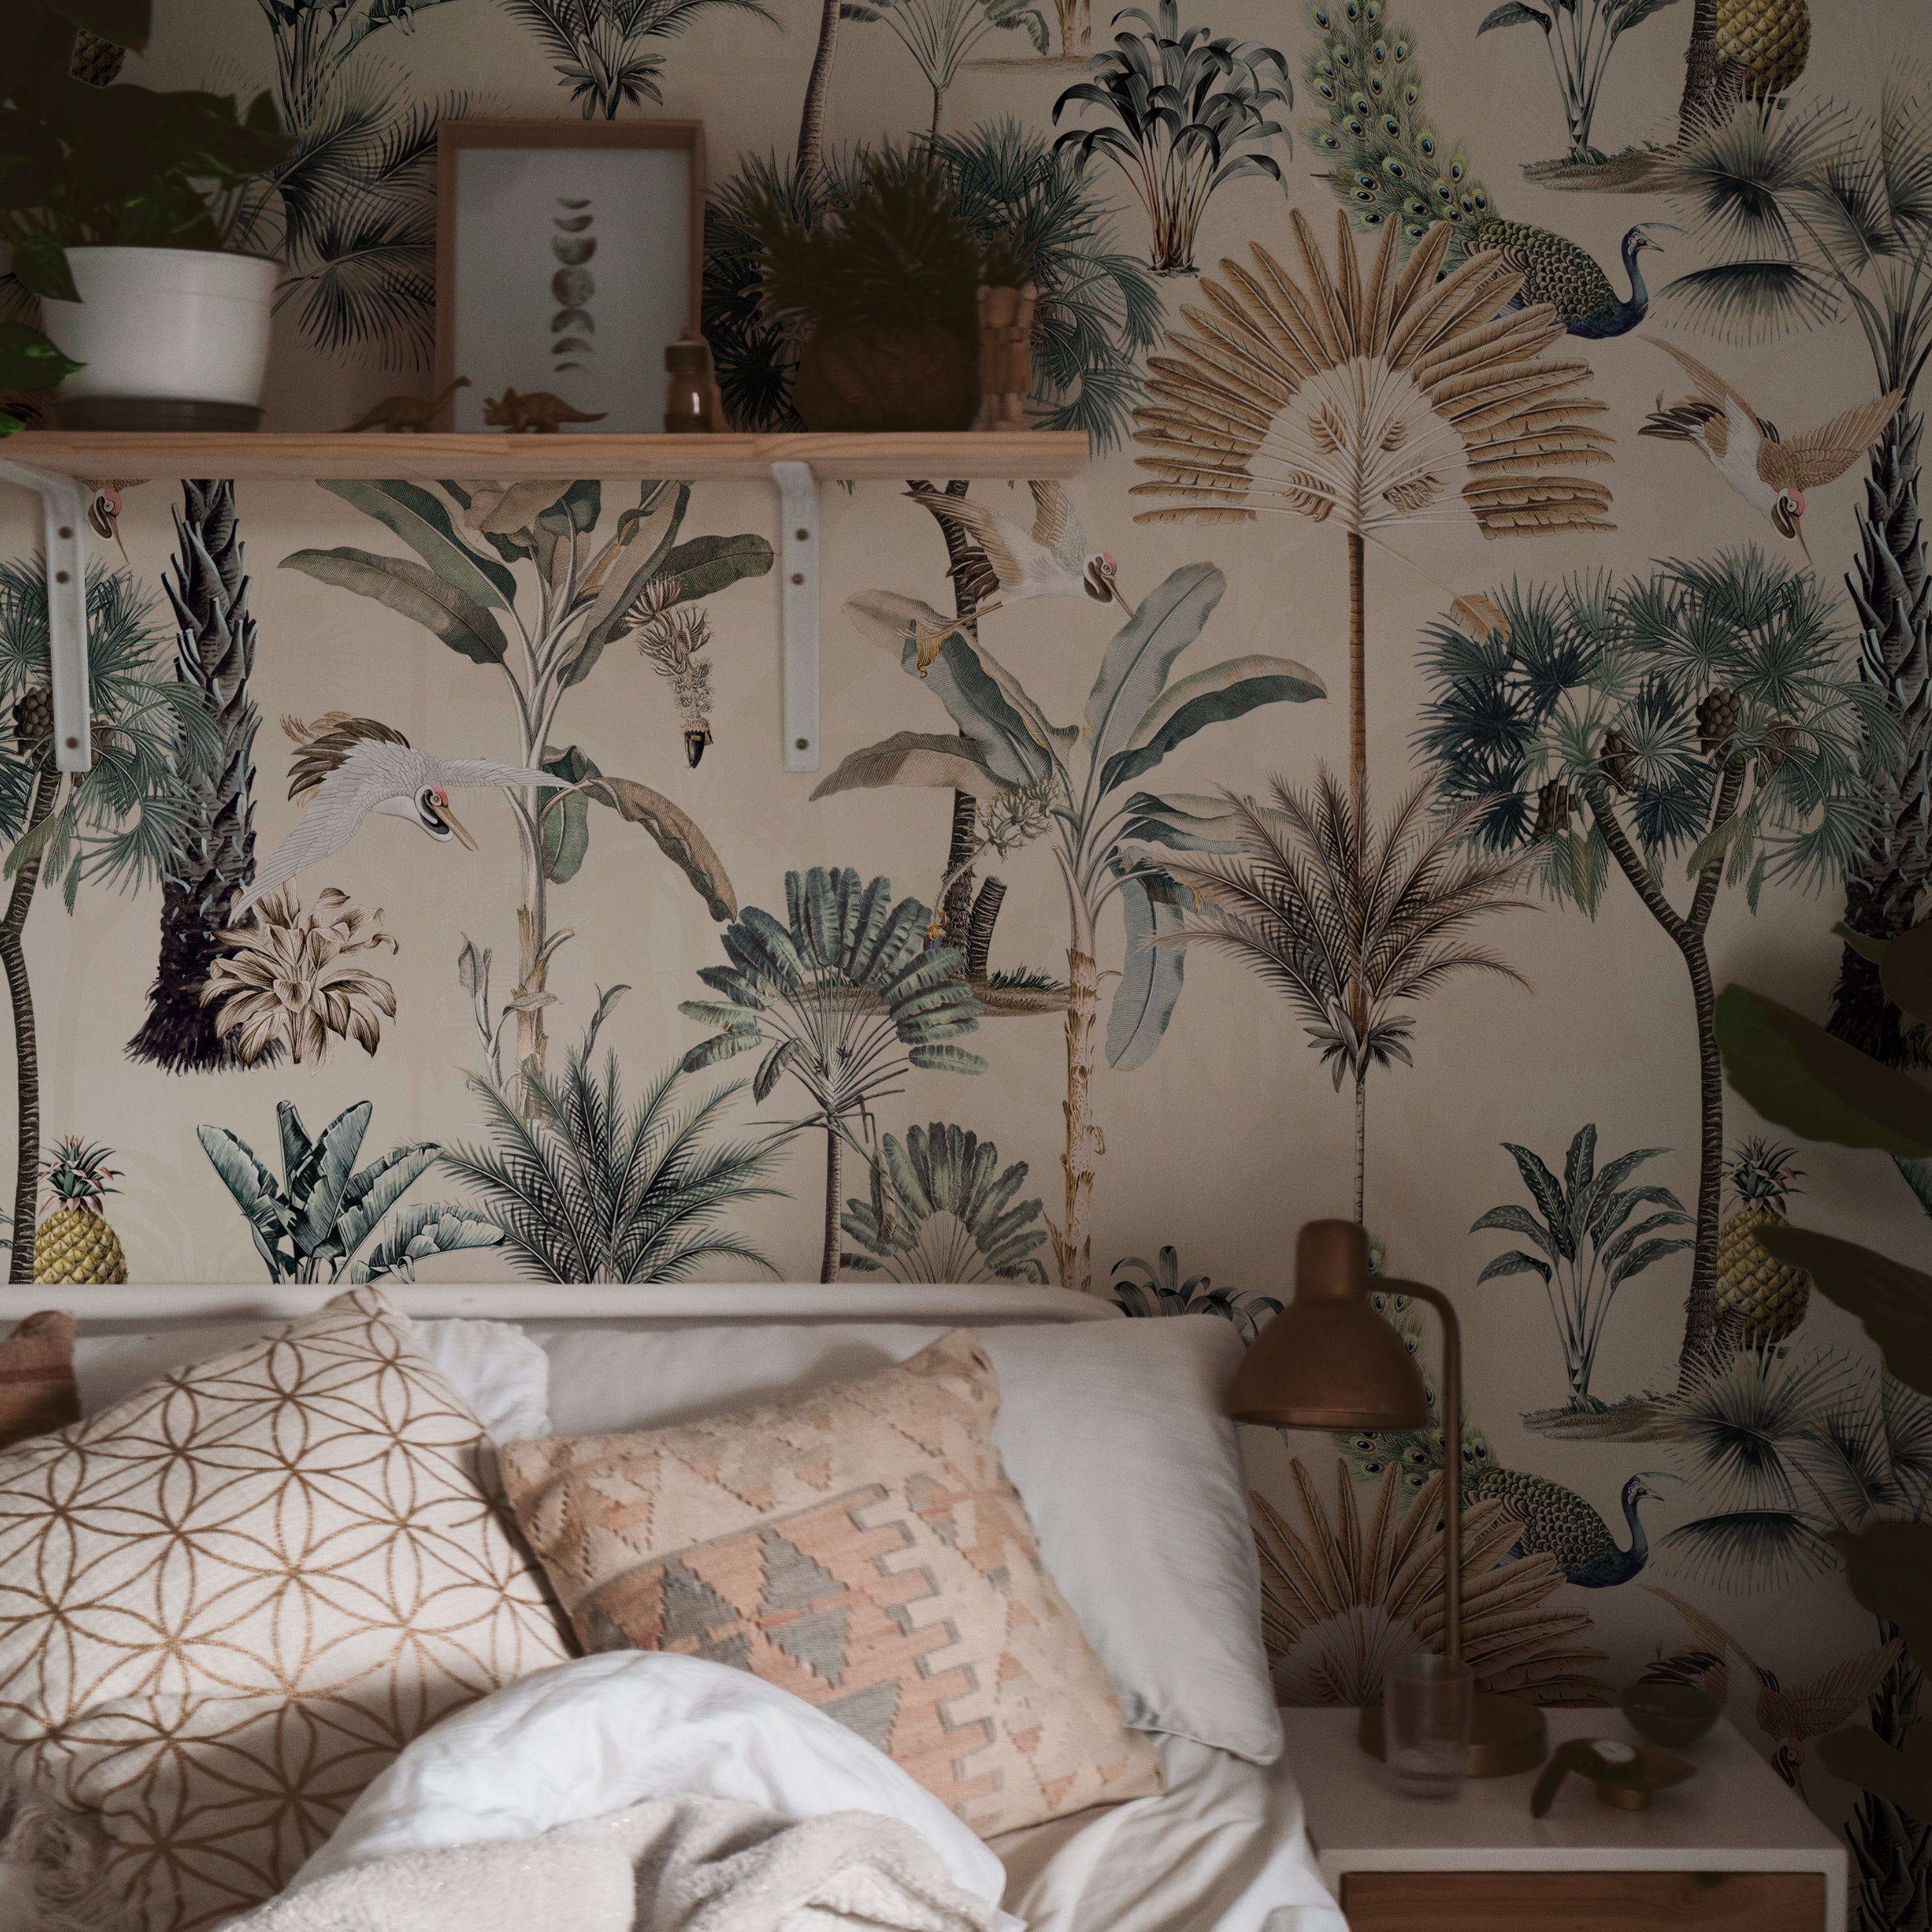 Close-up view of a bedroom wall covered with Exotic Ecru Wallpaper, emphasizing the intricate details of palm leaves, birds, and tropical plants on a neutral background, complementing the room's earthy and natural decor